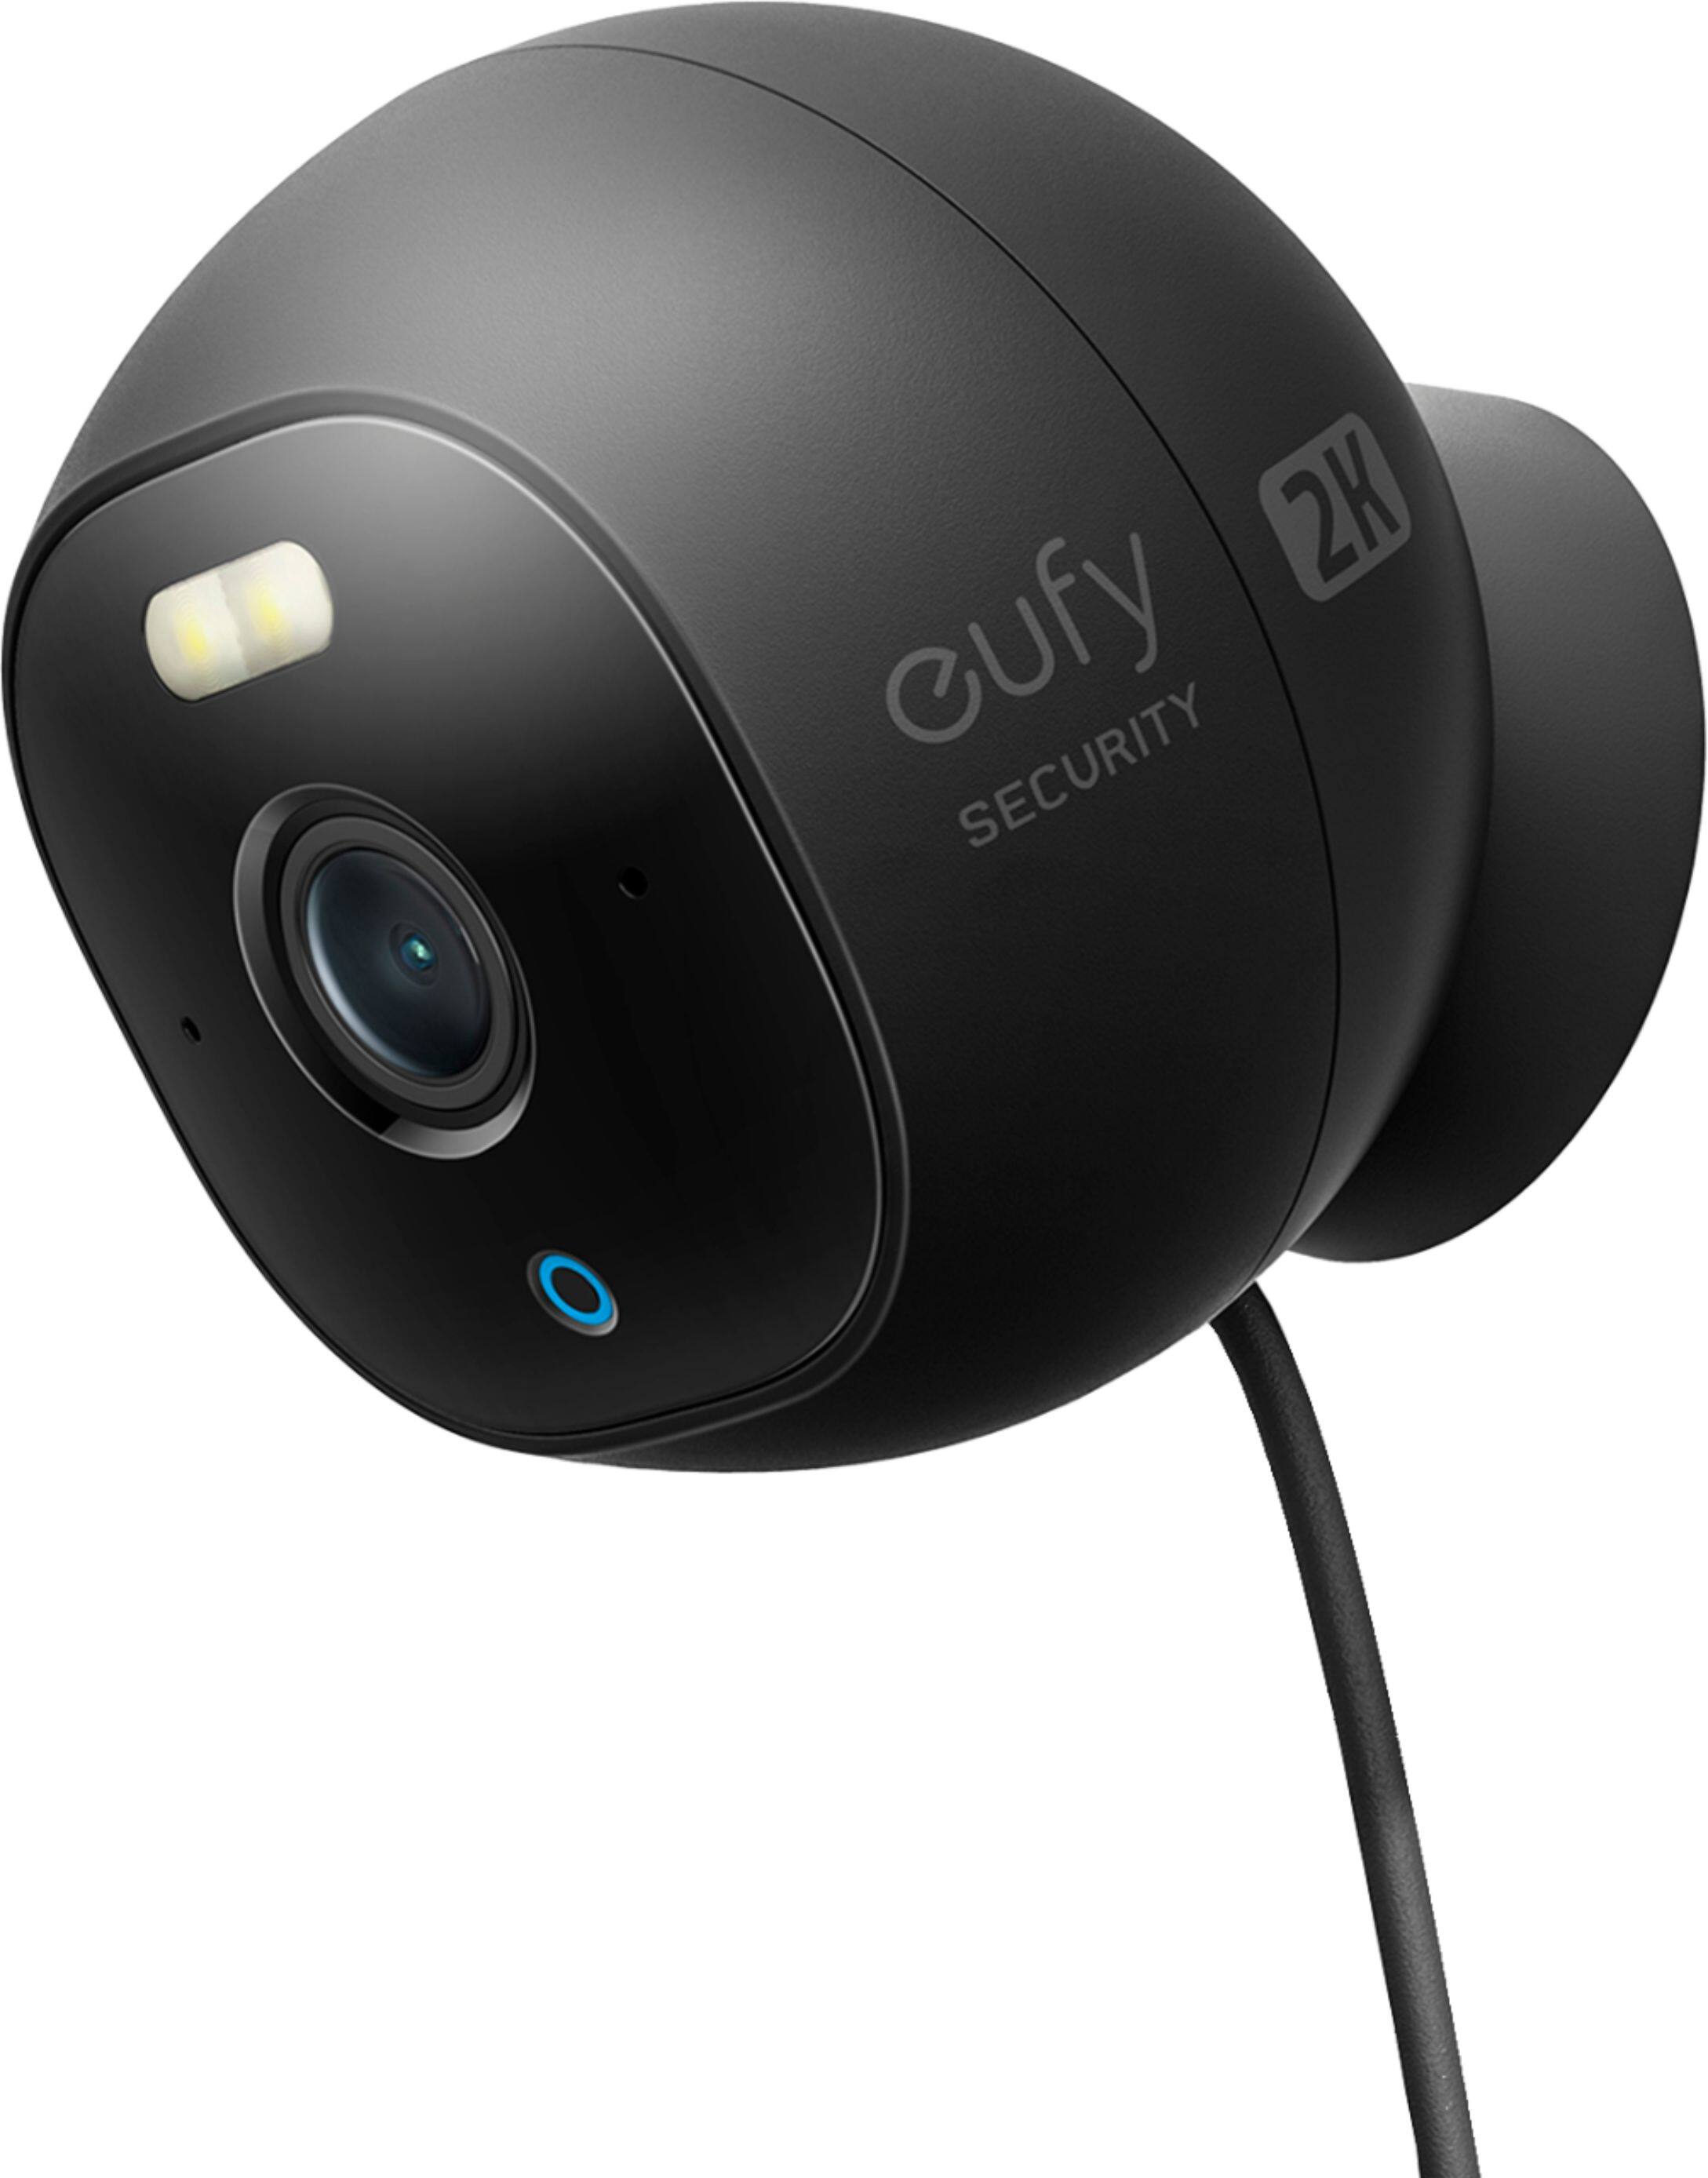 eufy - Security Outdoor Cam 2k Spotlight Wired - Black $74.99 + Free Shipping